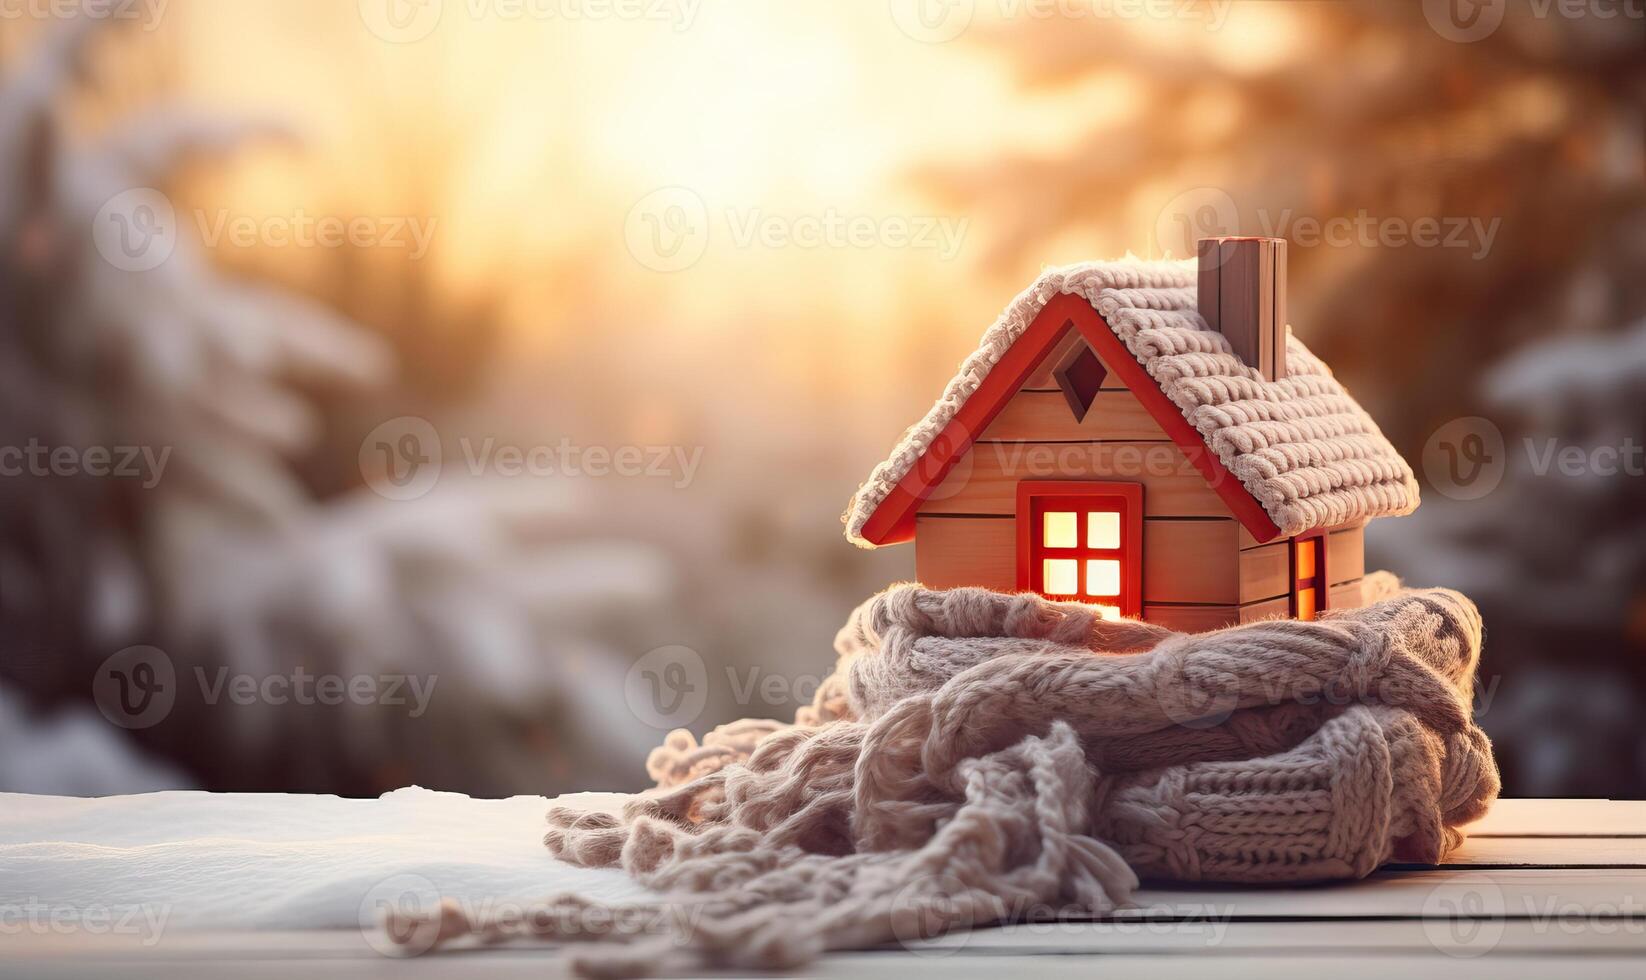 AI generated Small Figure of house with knitted scarf against blurred bokeh lights, symbol for heating system or photo